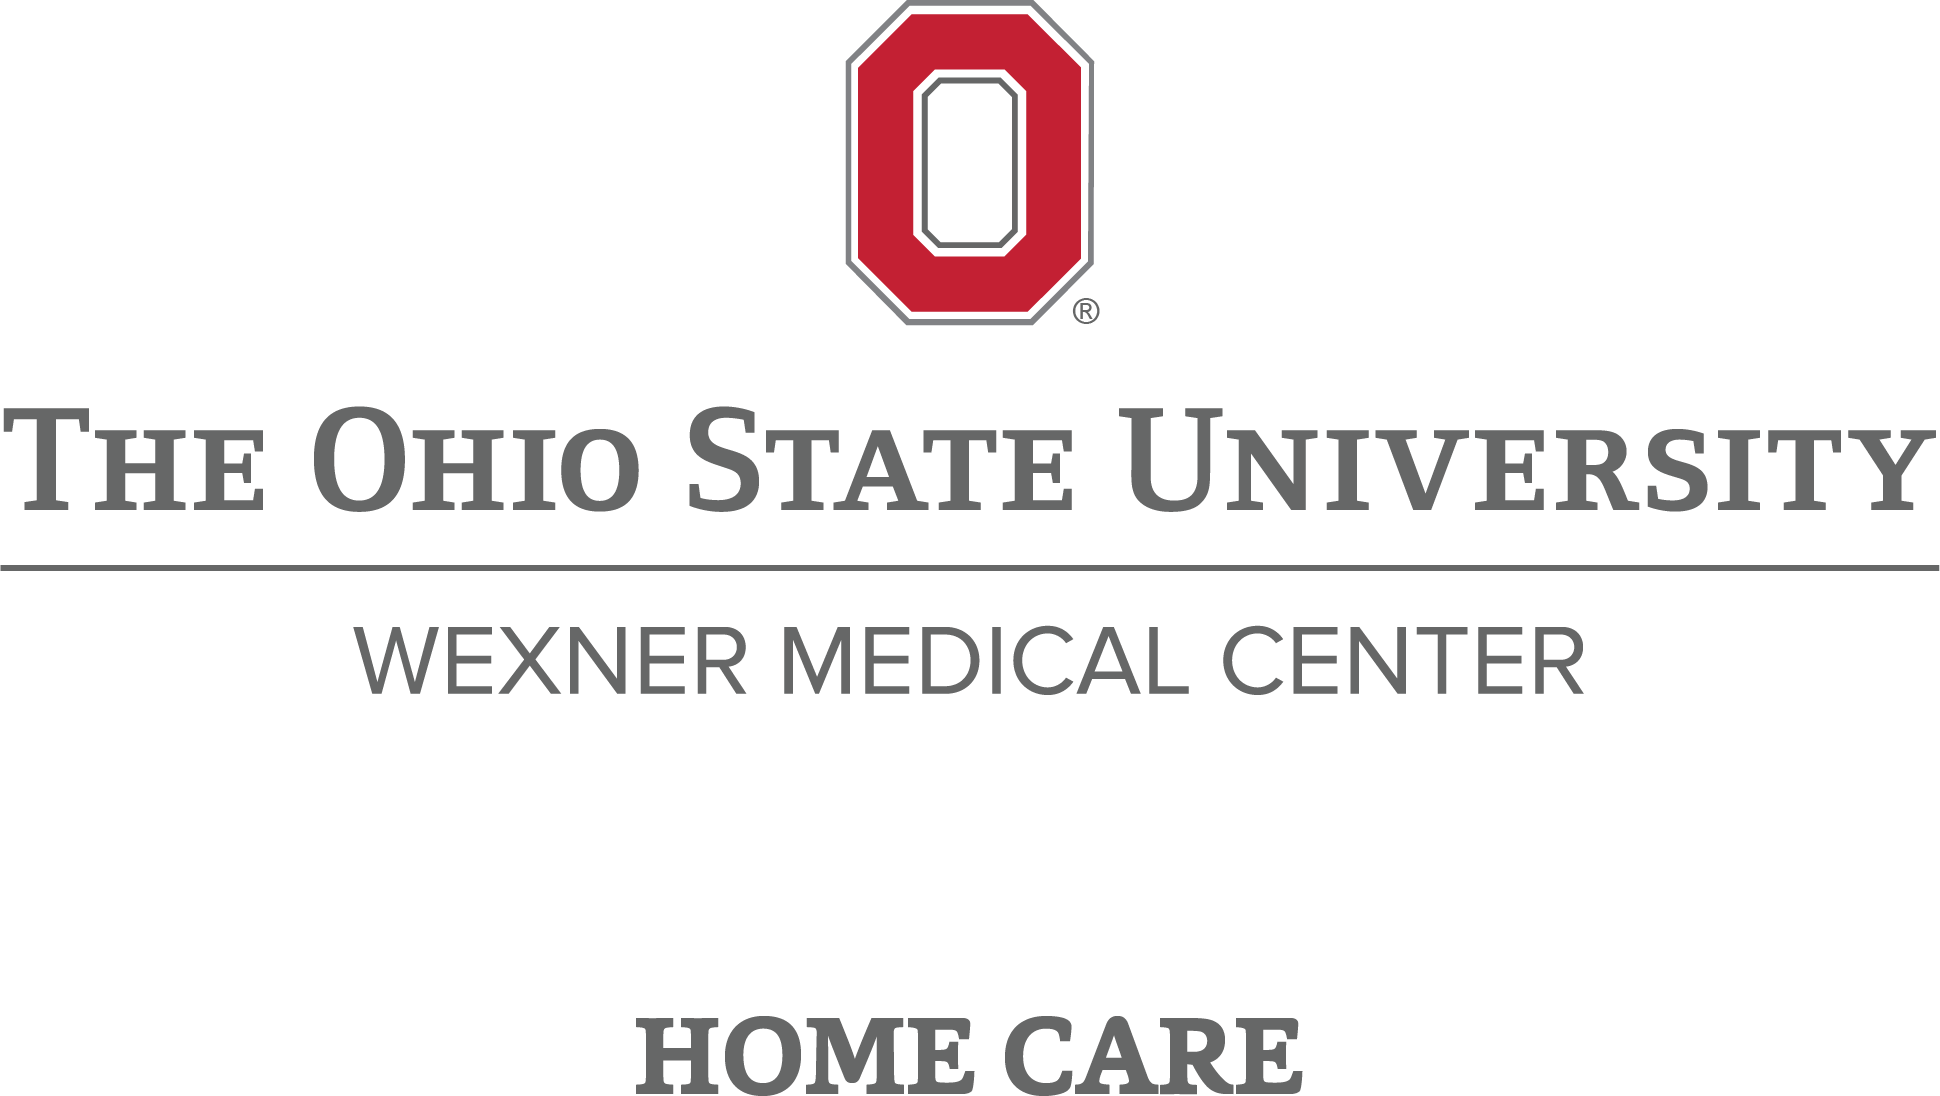 The Ohio State University Wexner Medical Center Home Care logo